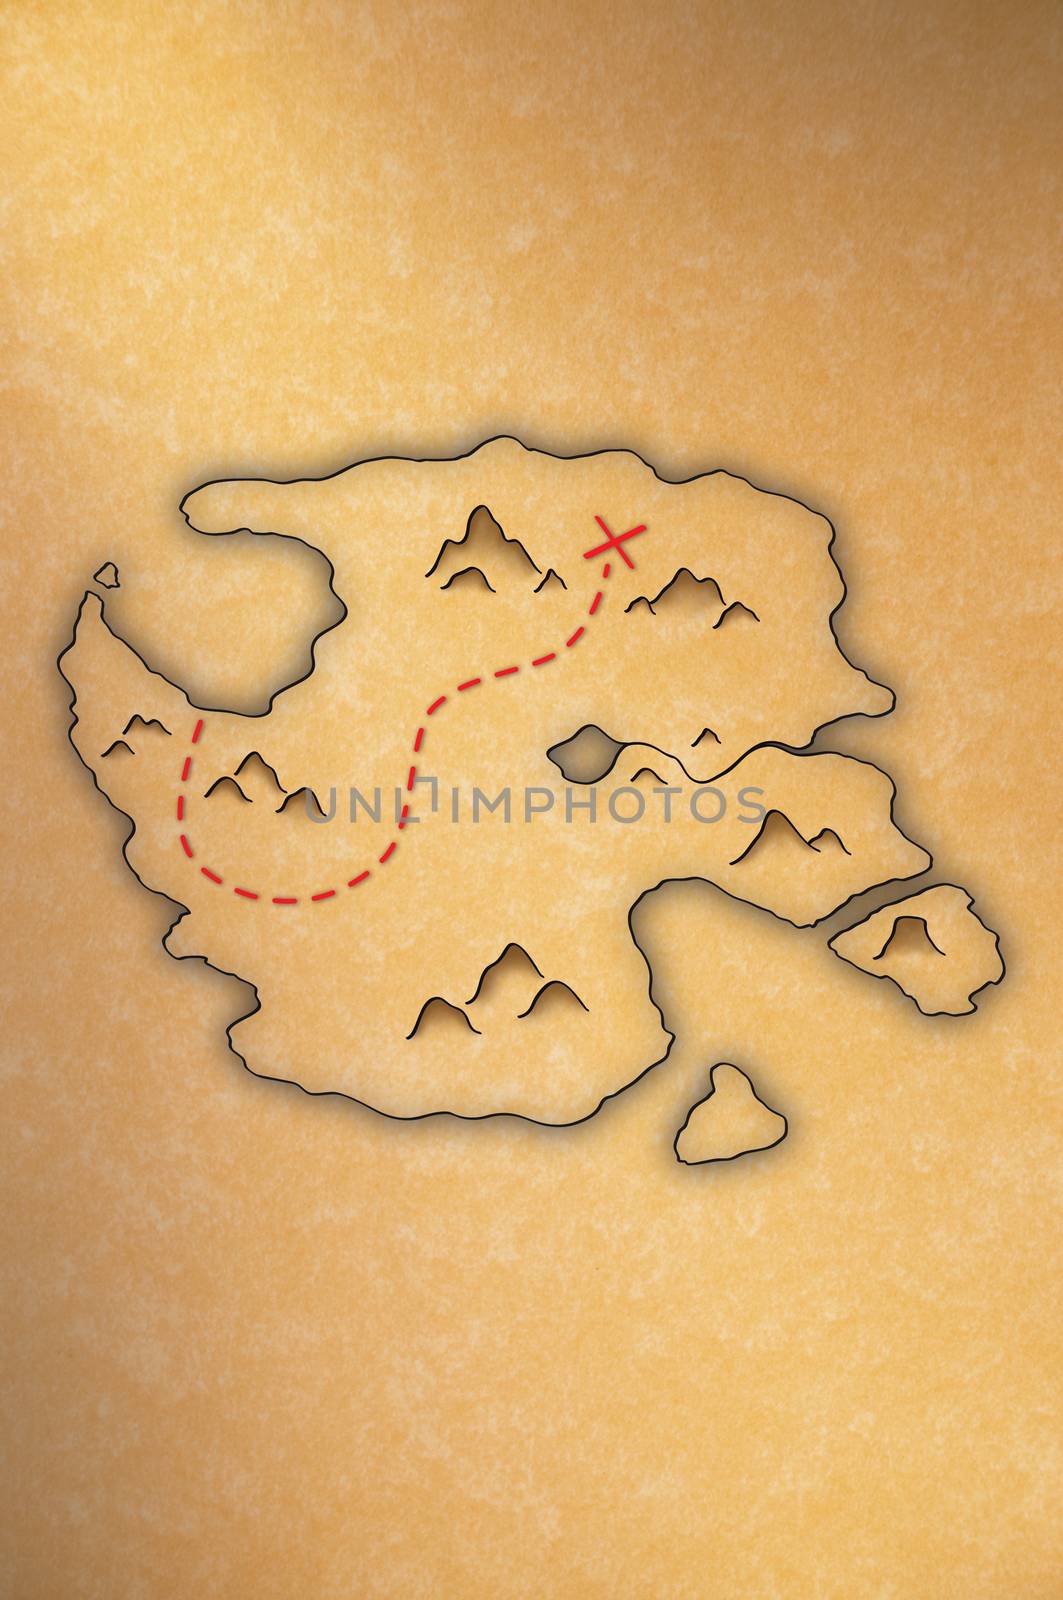 Antique-looking treasure map of an island on yellow paper